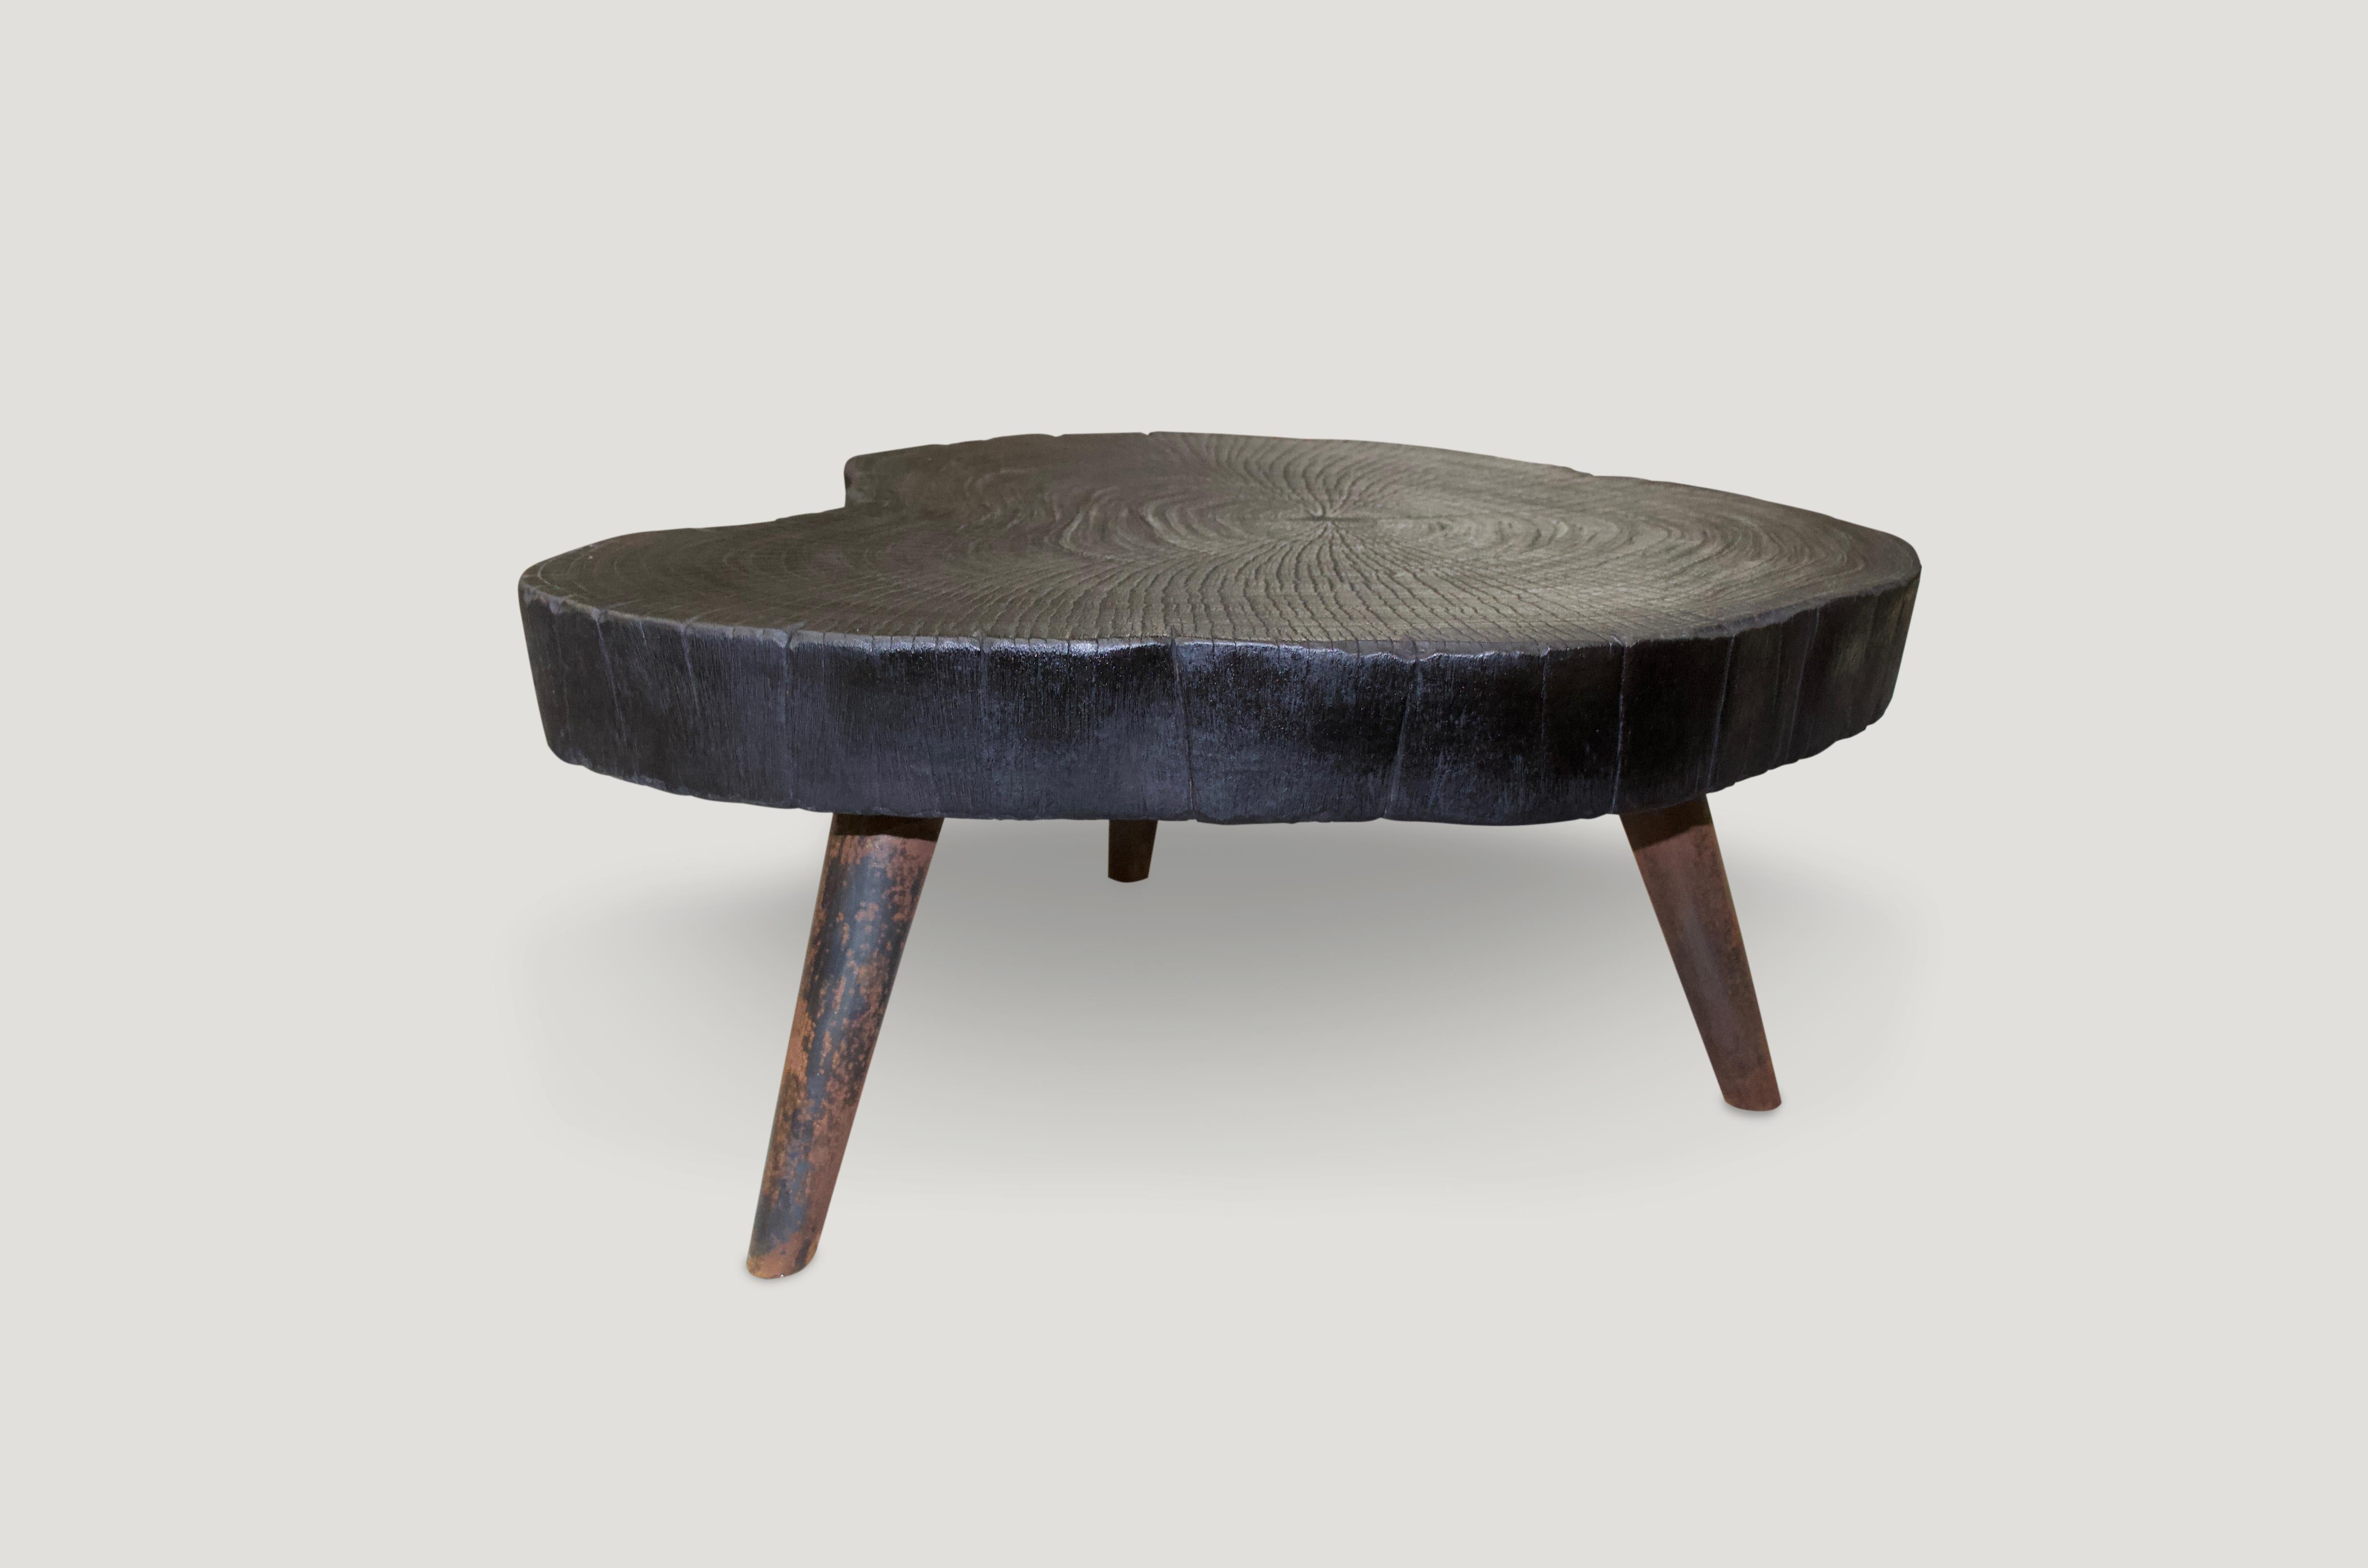 Single four inch slab coffee table. Charred and set on a mid century style burnt metal base, which we can also finish In pure black if preferred. We have a collection available, all sliced from the same log. The price represents one.

The Triple